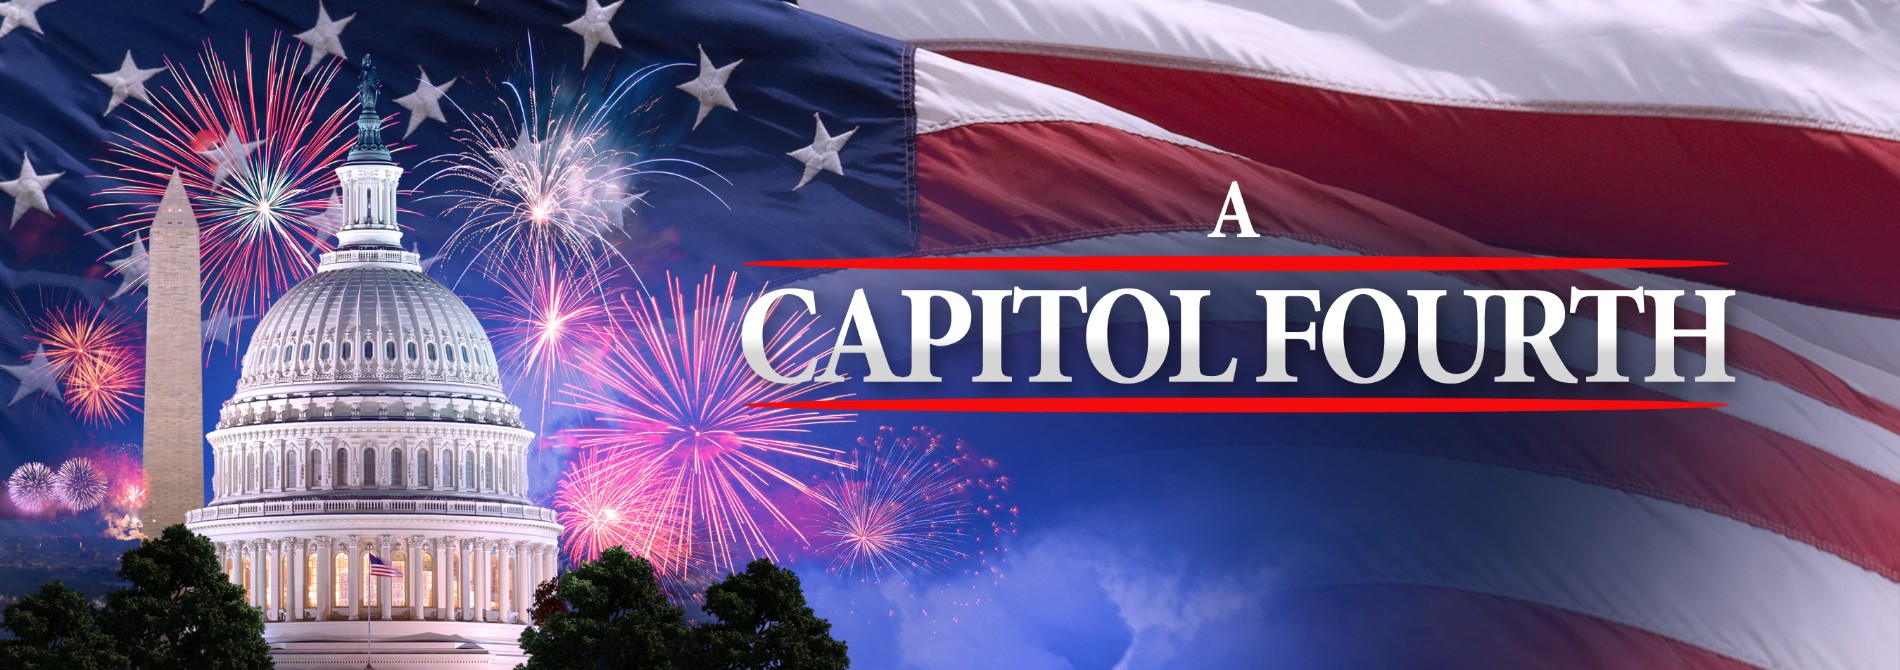 A CAPITOL FOURTH banner